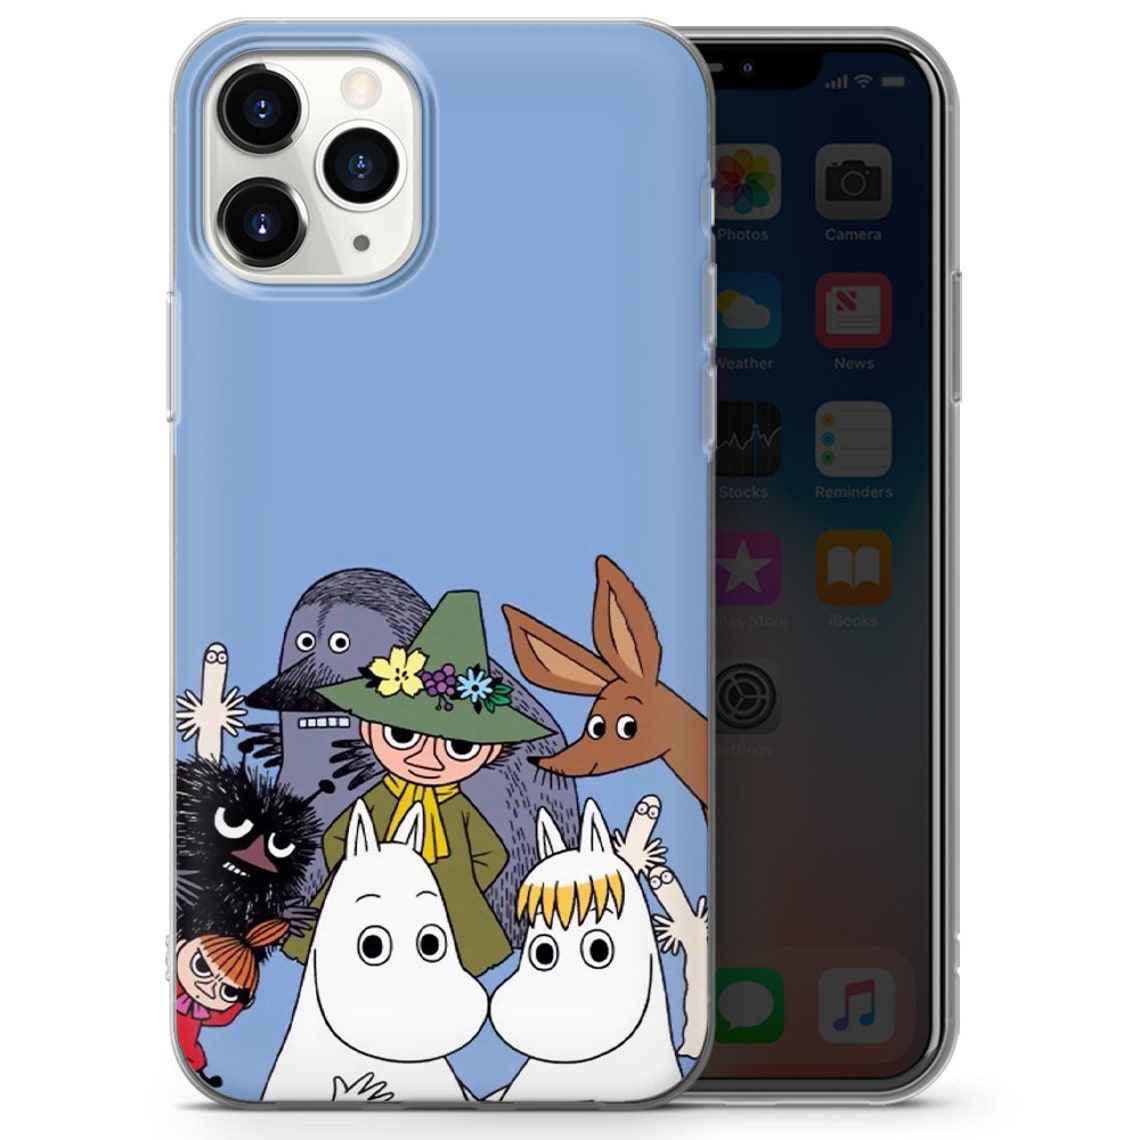 Moomin Trolls Phone Case Cover for iPhone 7 8 XS XR 11 | Etsy